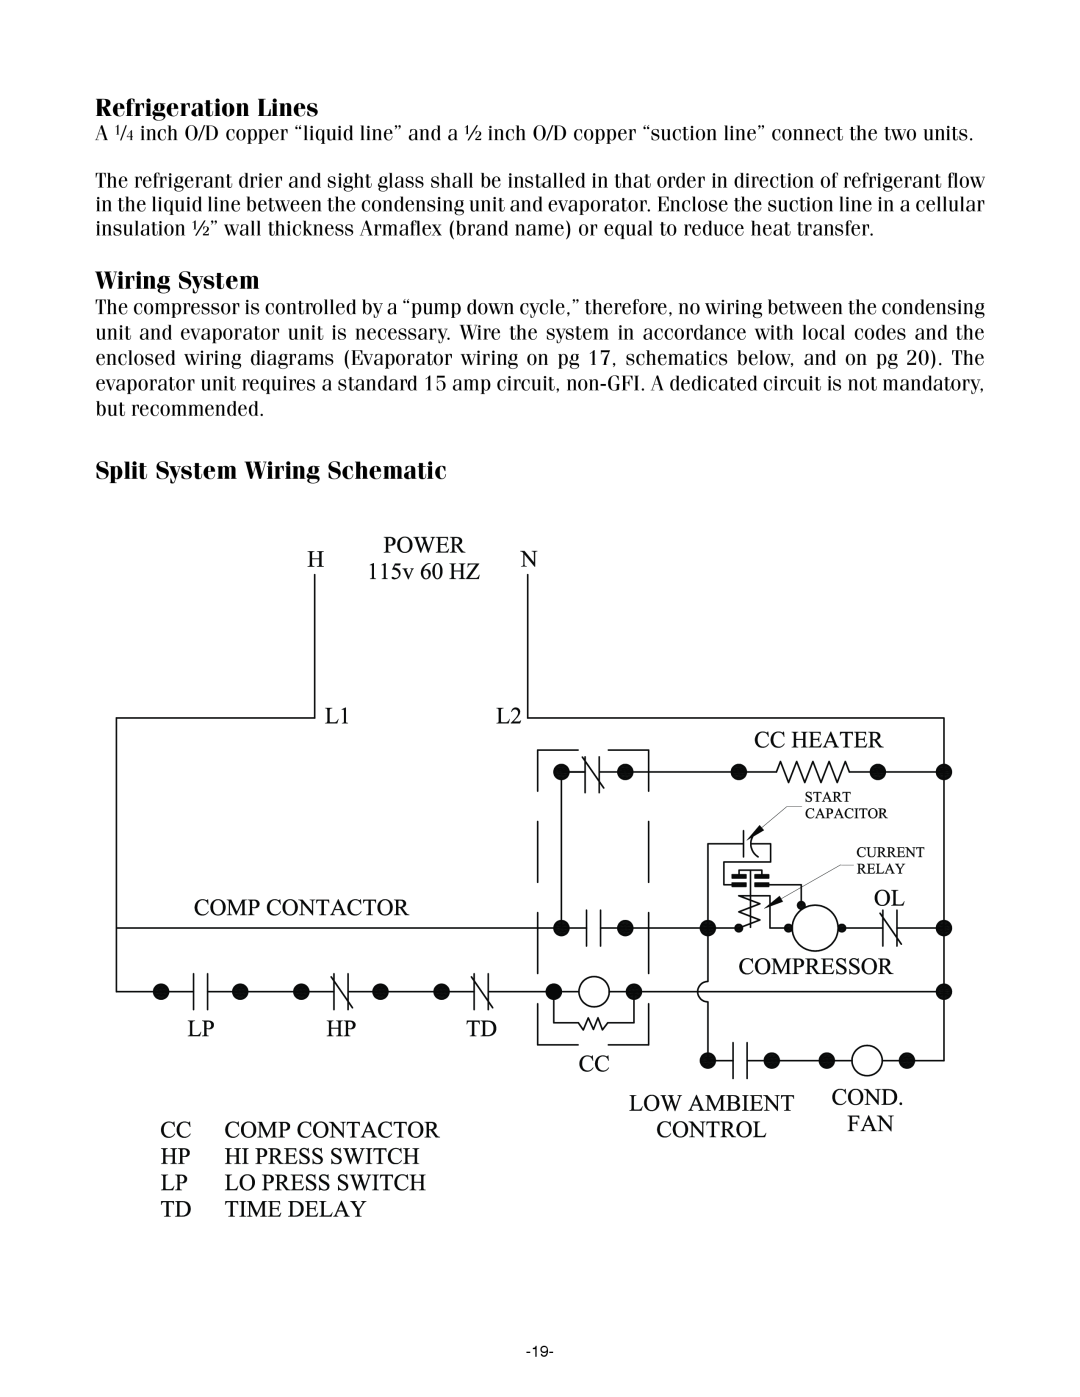 WhisperKool SS7000, SS4000 owner manual Refrigeration Lines, Wiring System, Split System Wiring Schematic 